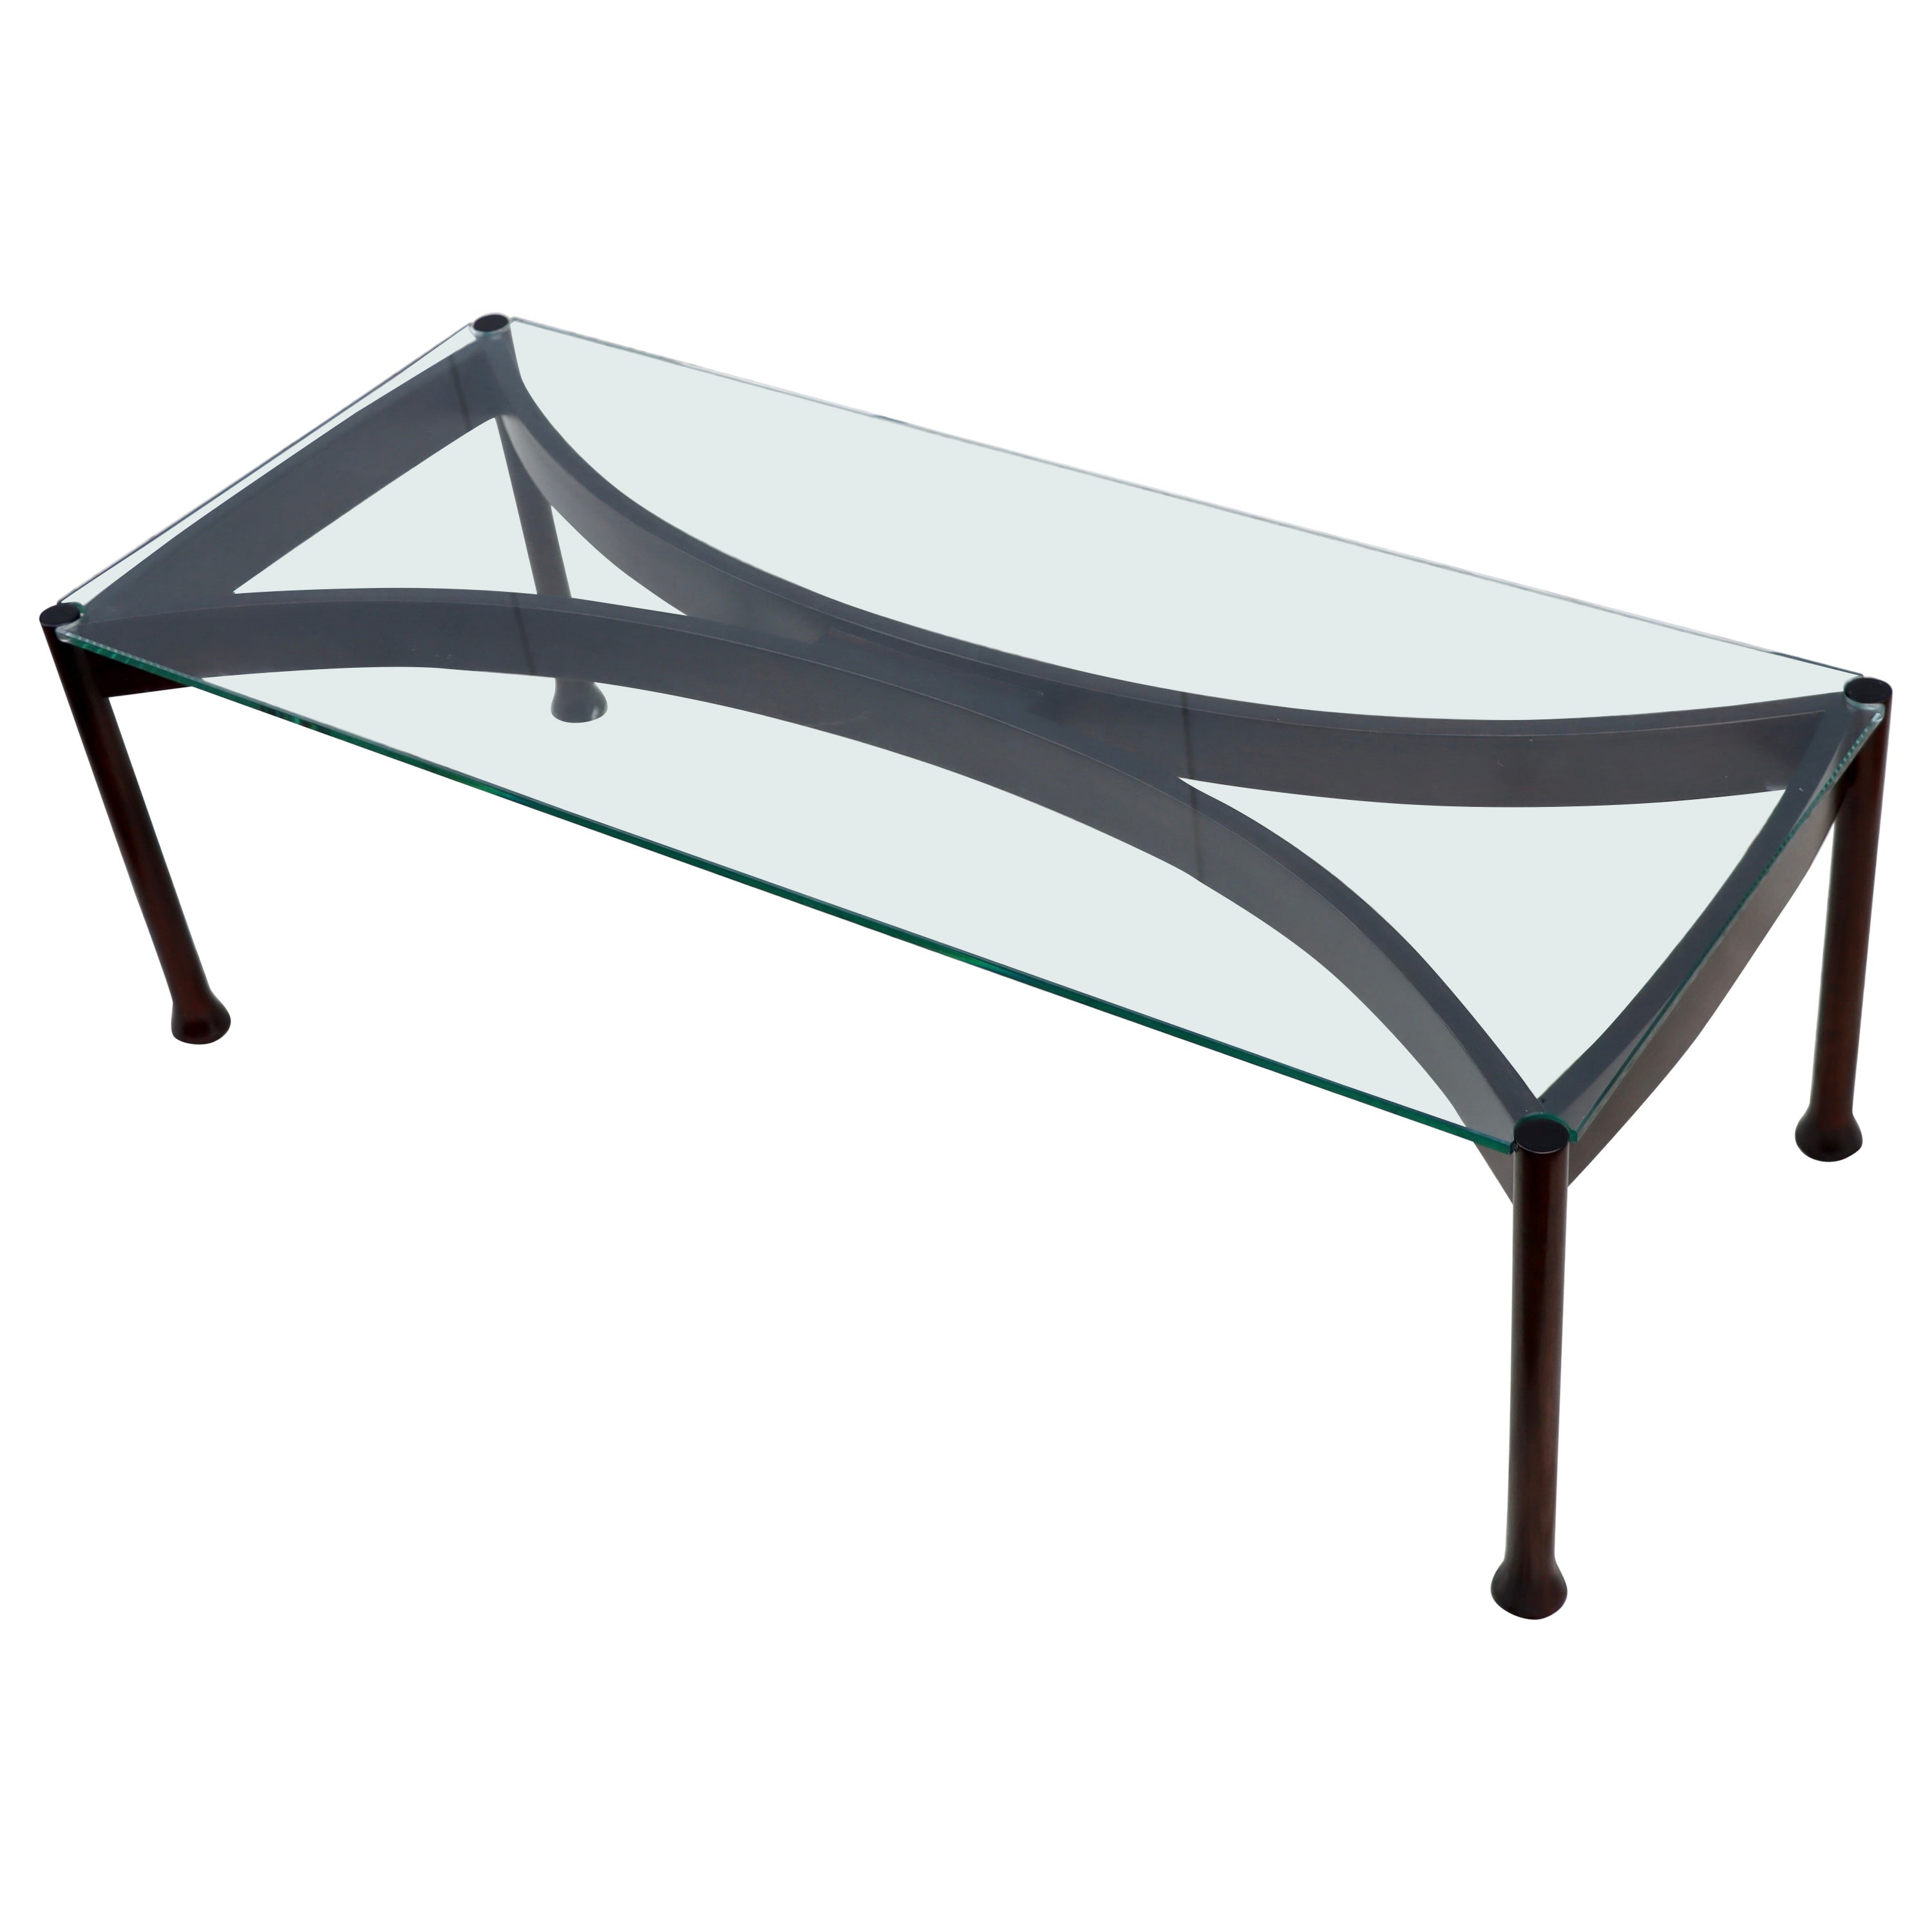 1960s Mid-Century Modern Italian Coffee Table with Glass Top